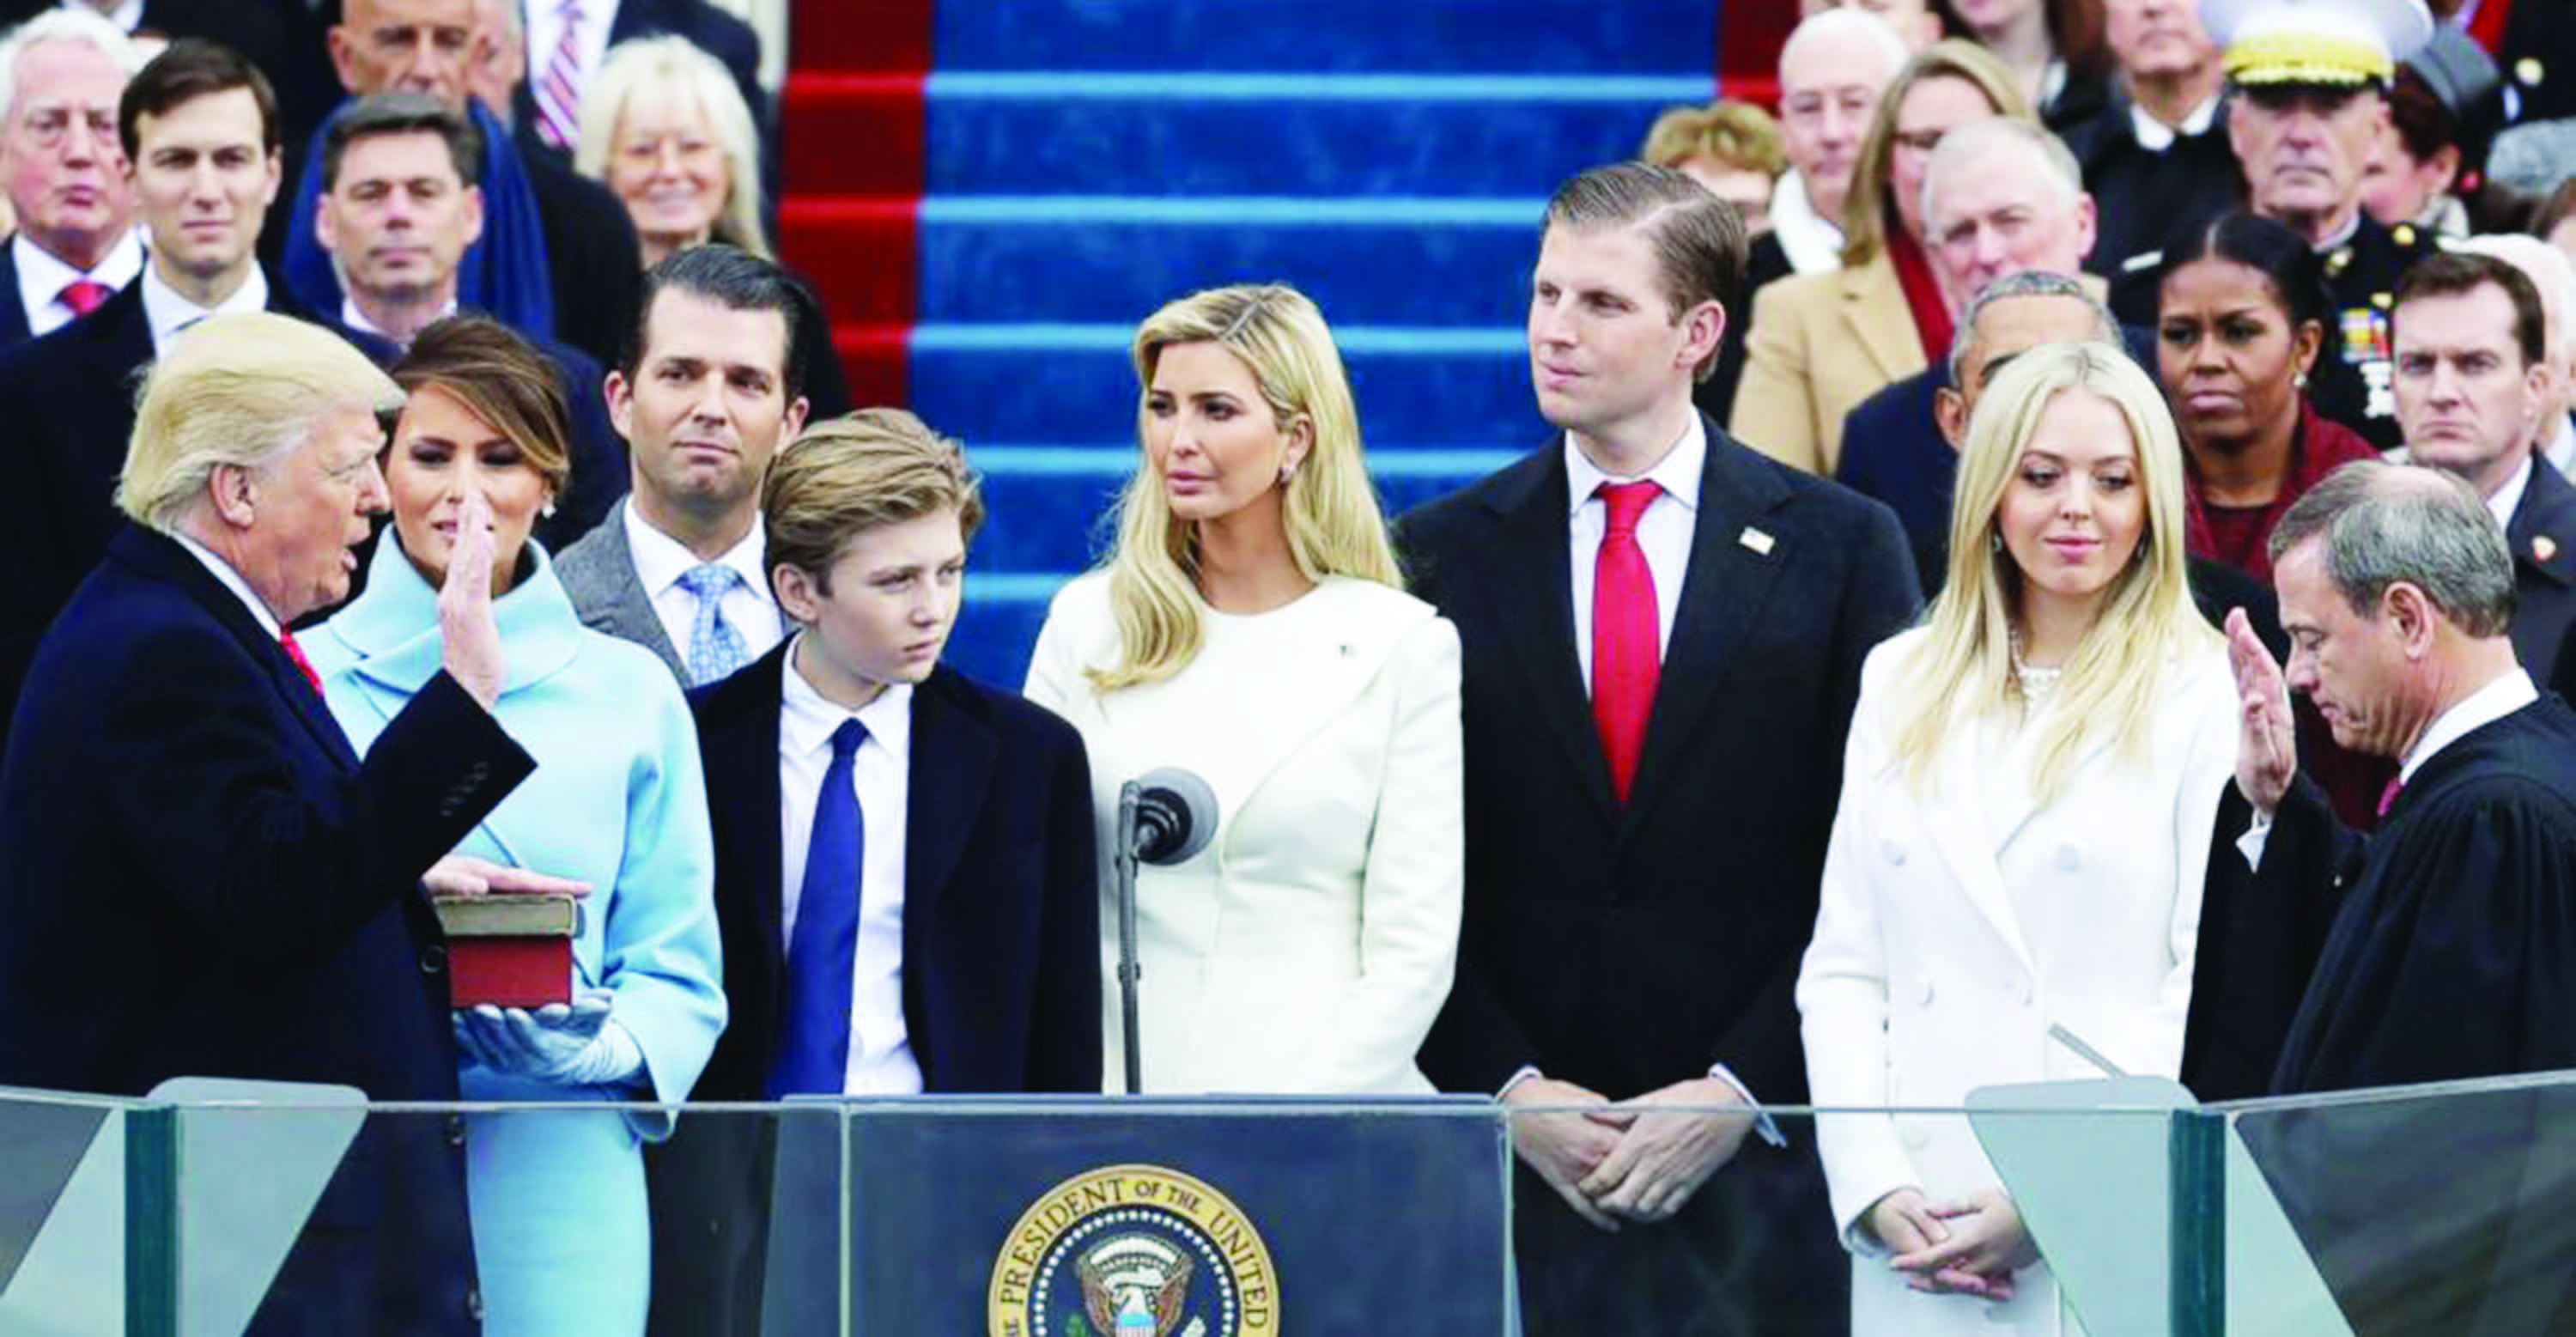 Supreme Court chief justice John Roberts administering the oath of office to Trump, with wife Melania holding the Bible and the Trump family in attendance